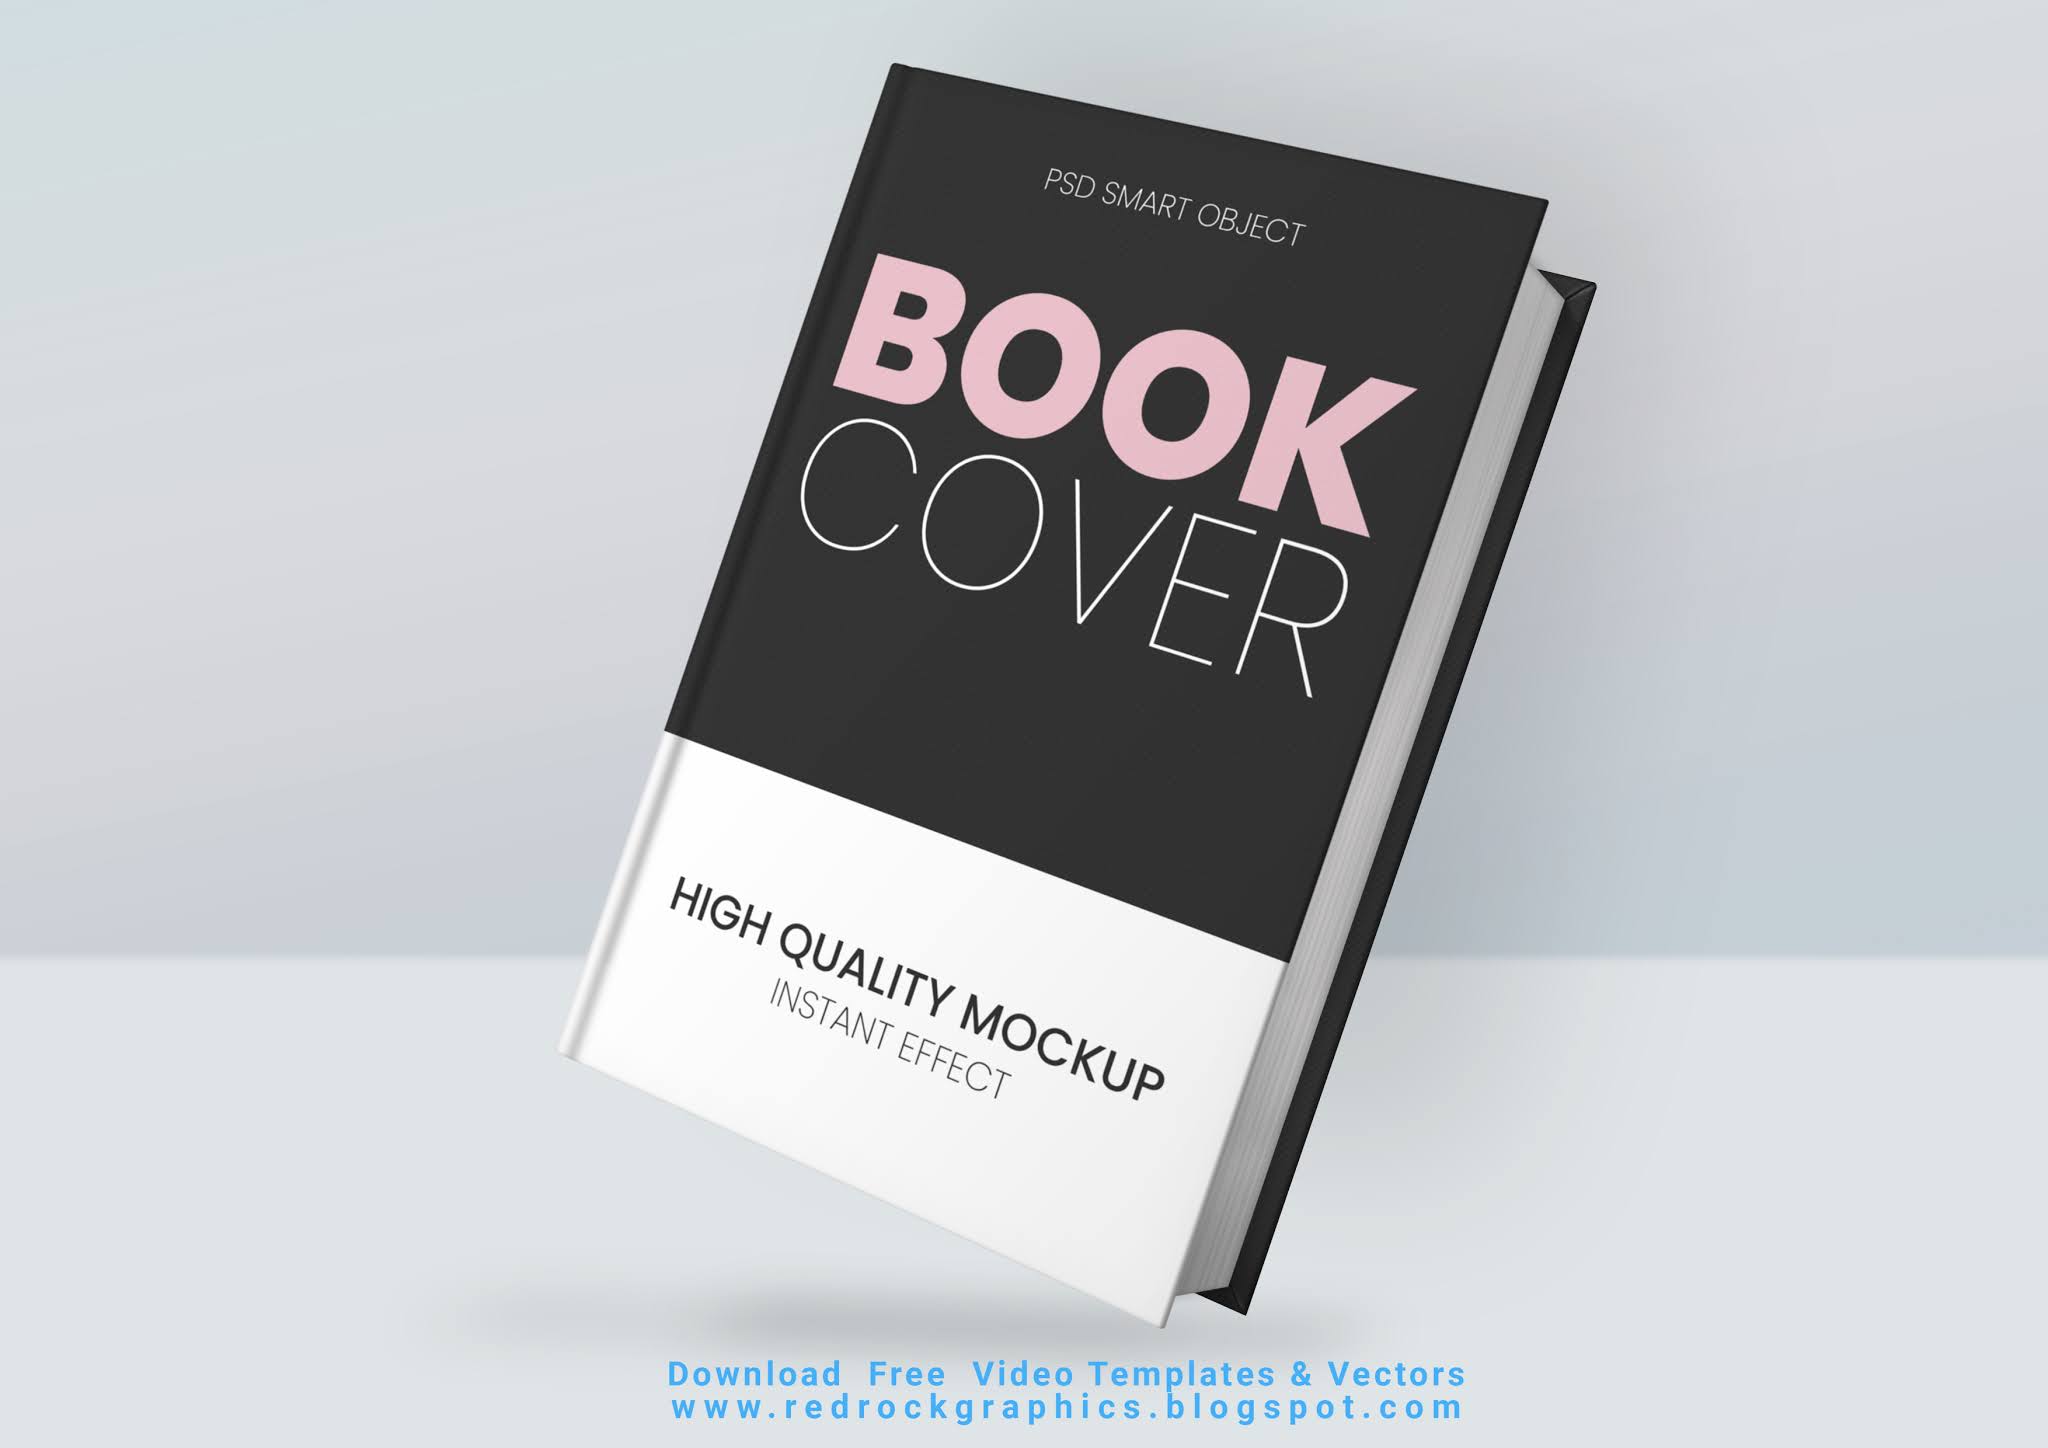 Hard Cover Book Mockup Template Free Download Photoshop Mockup Psd